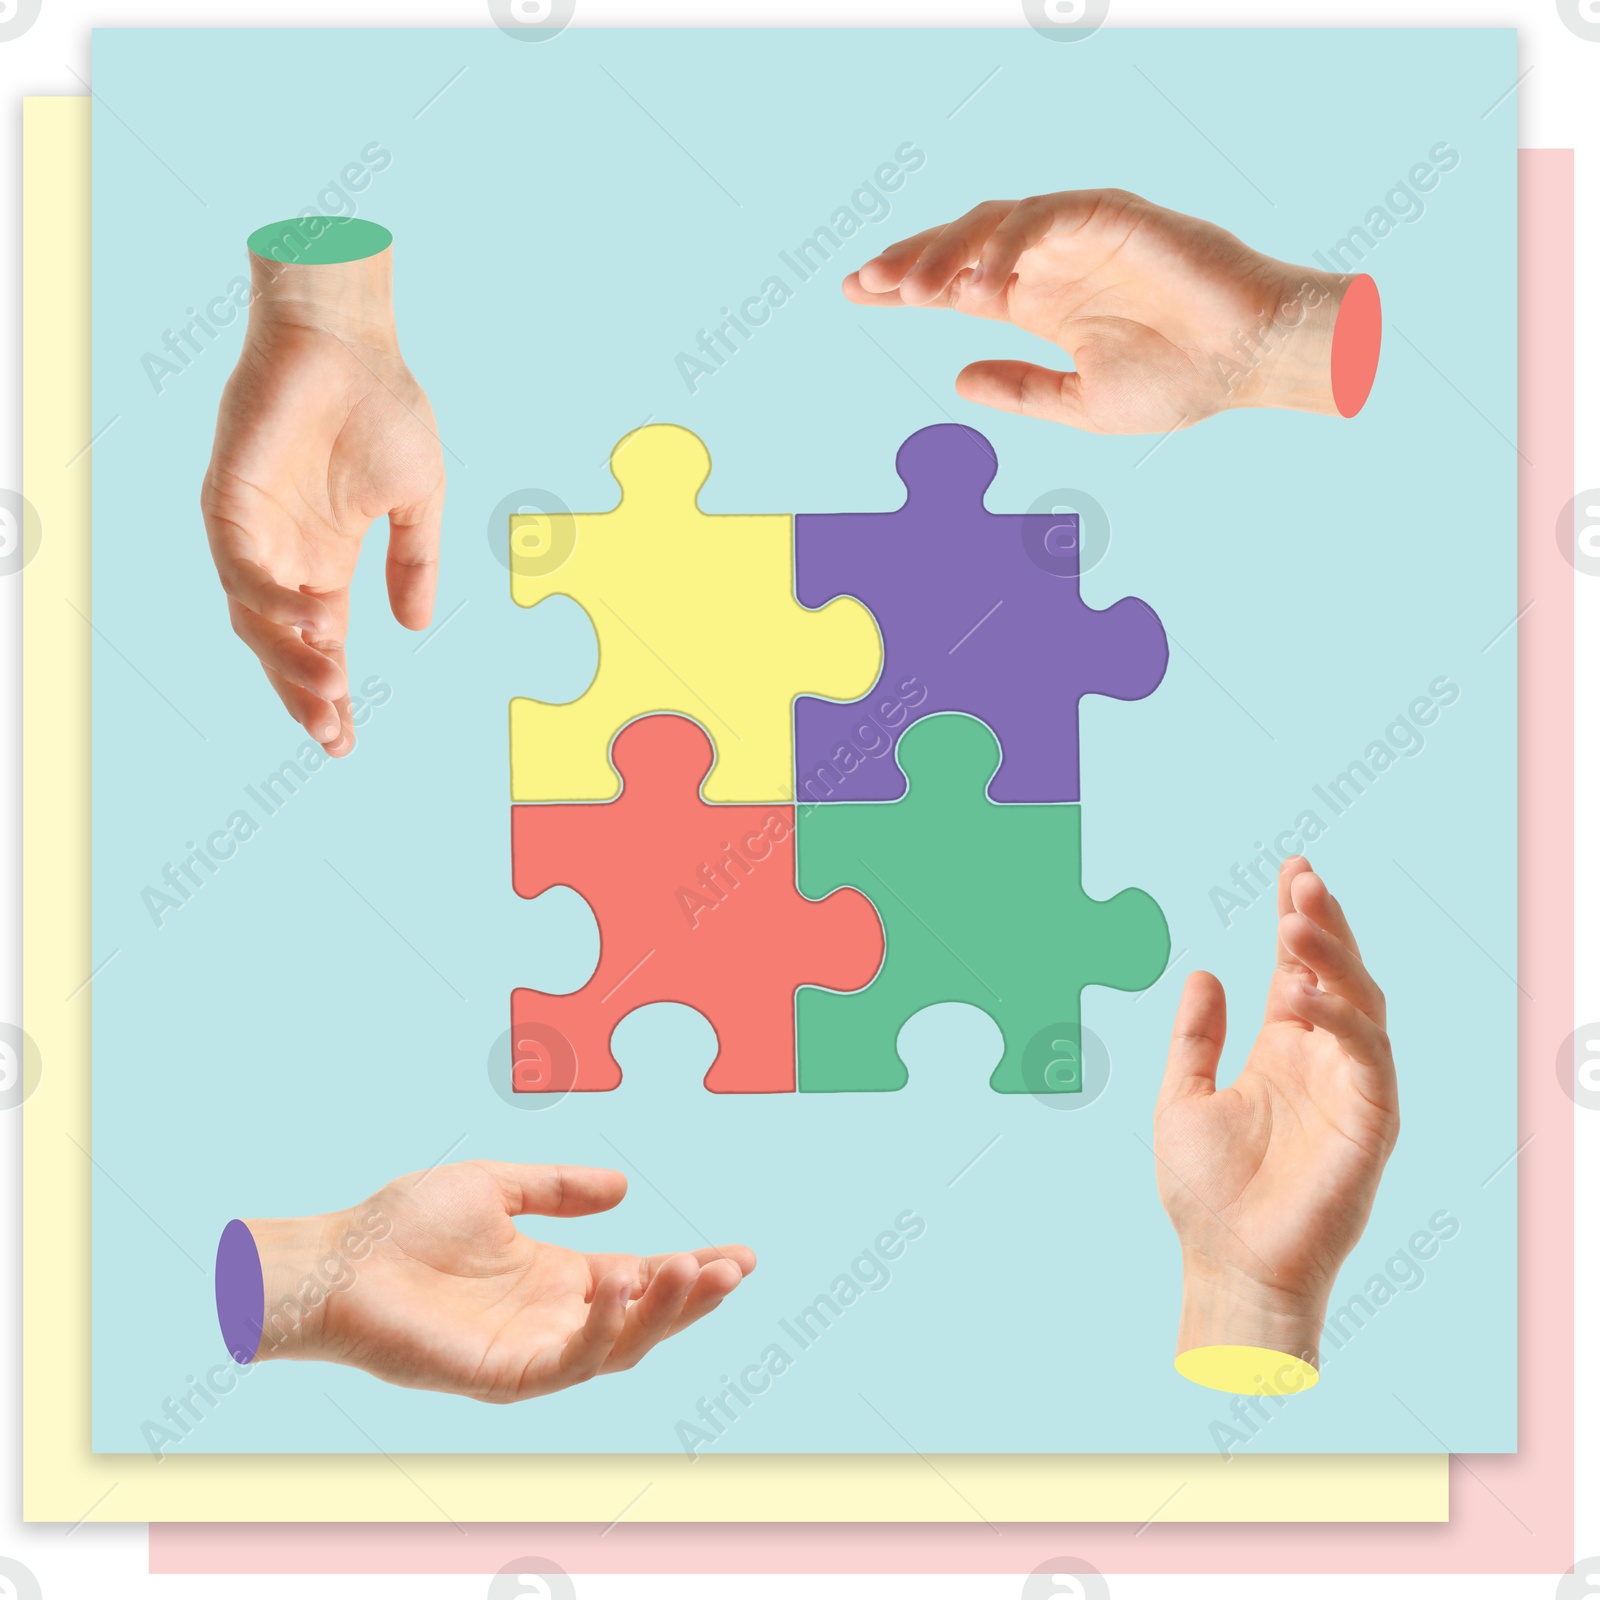 Image of Hands and combined jigsaw puzzle pieces on color background. Stylish art collage